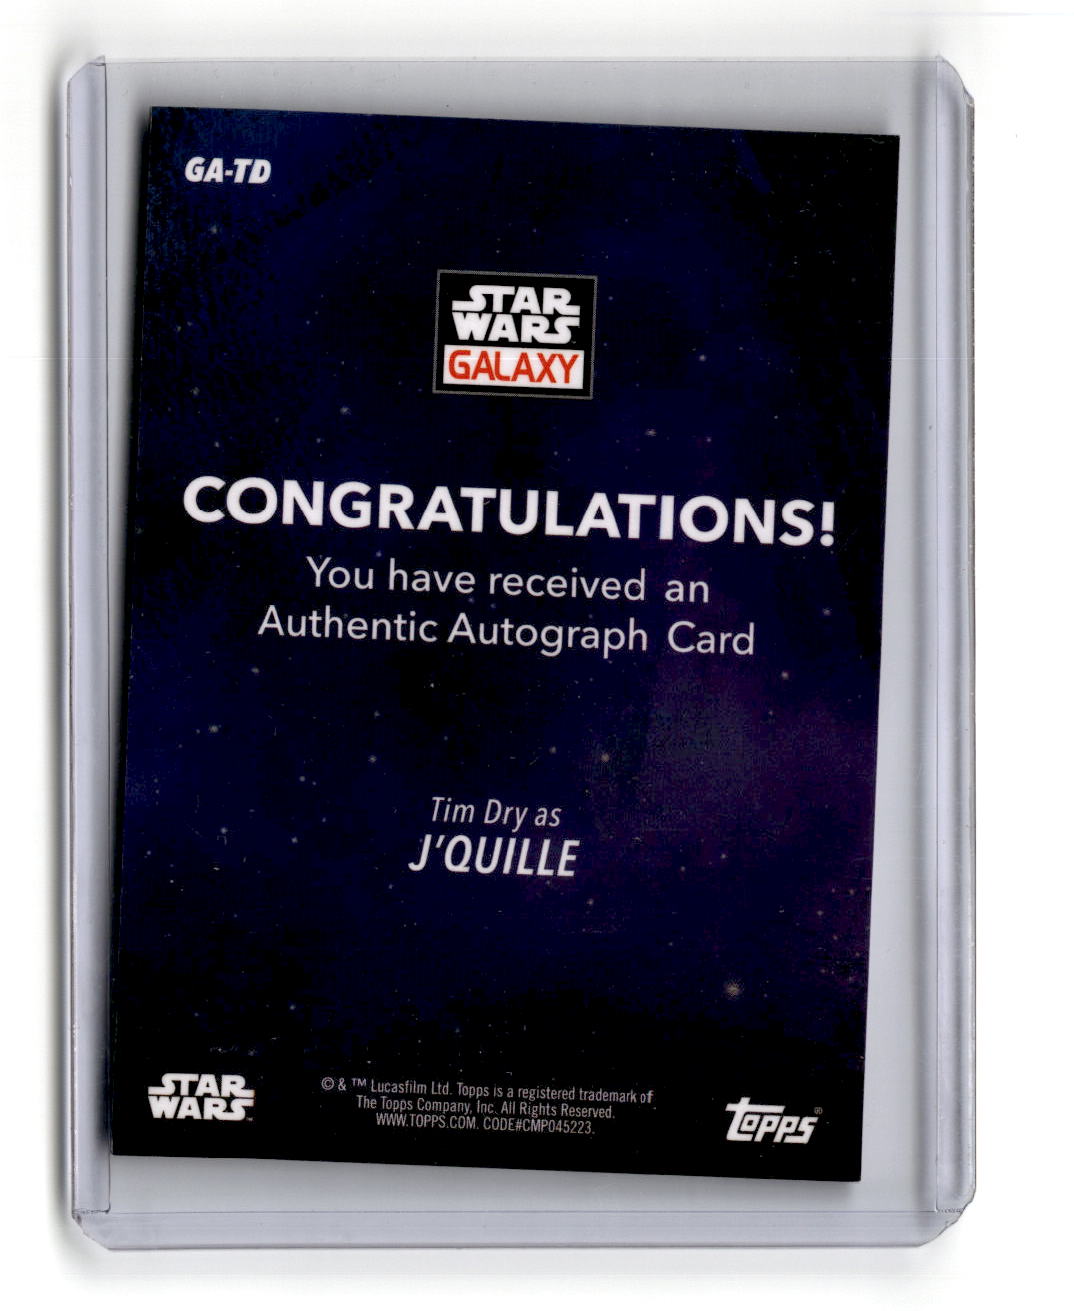 2021 Topps Star Wars Galaxy J'Quille Tim Dry Auto